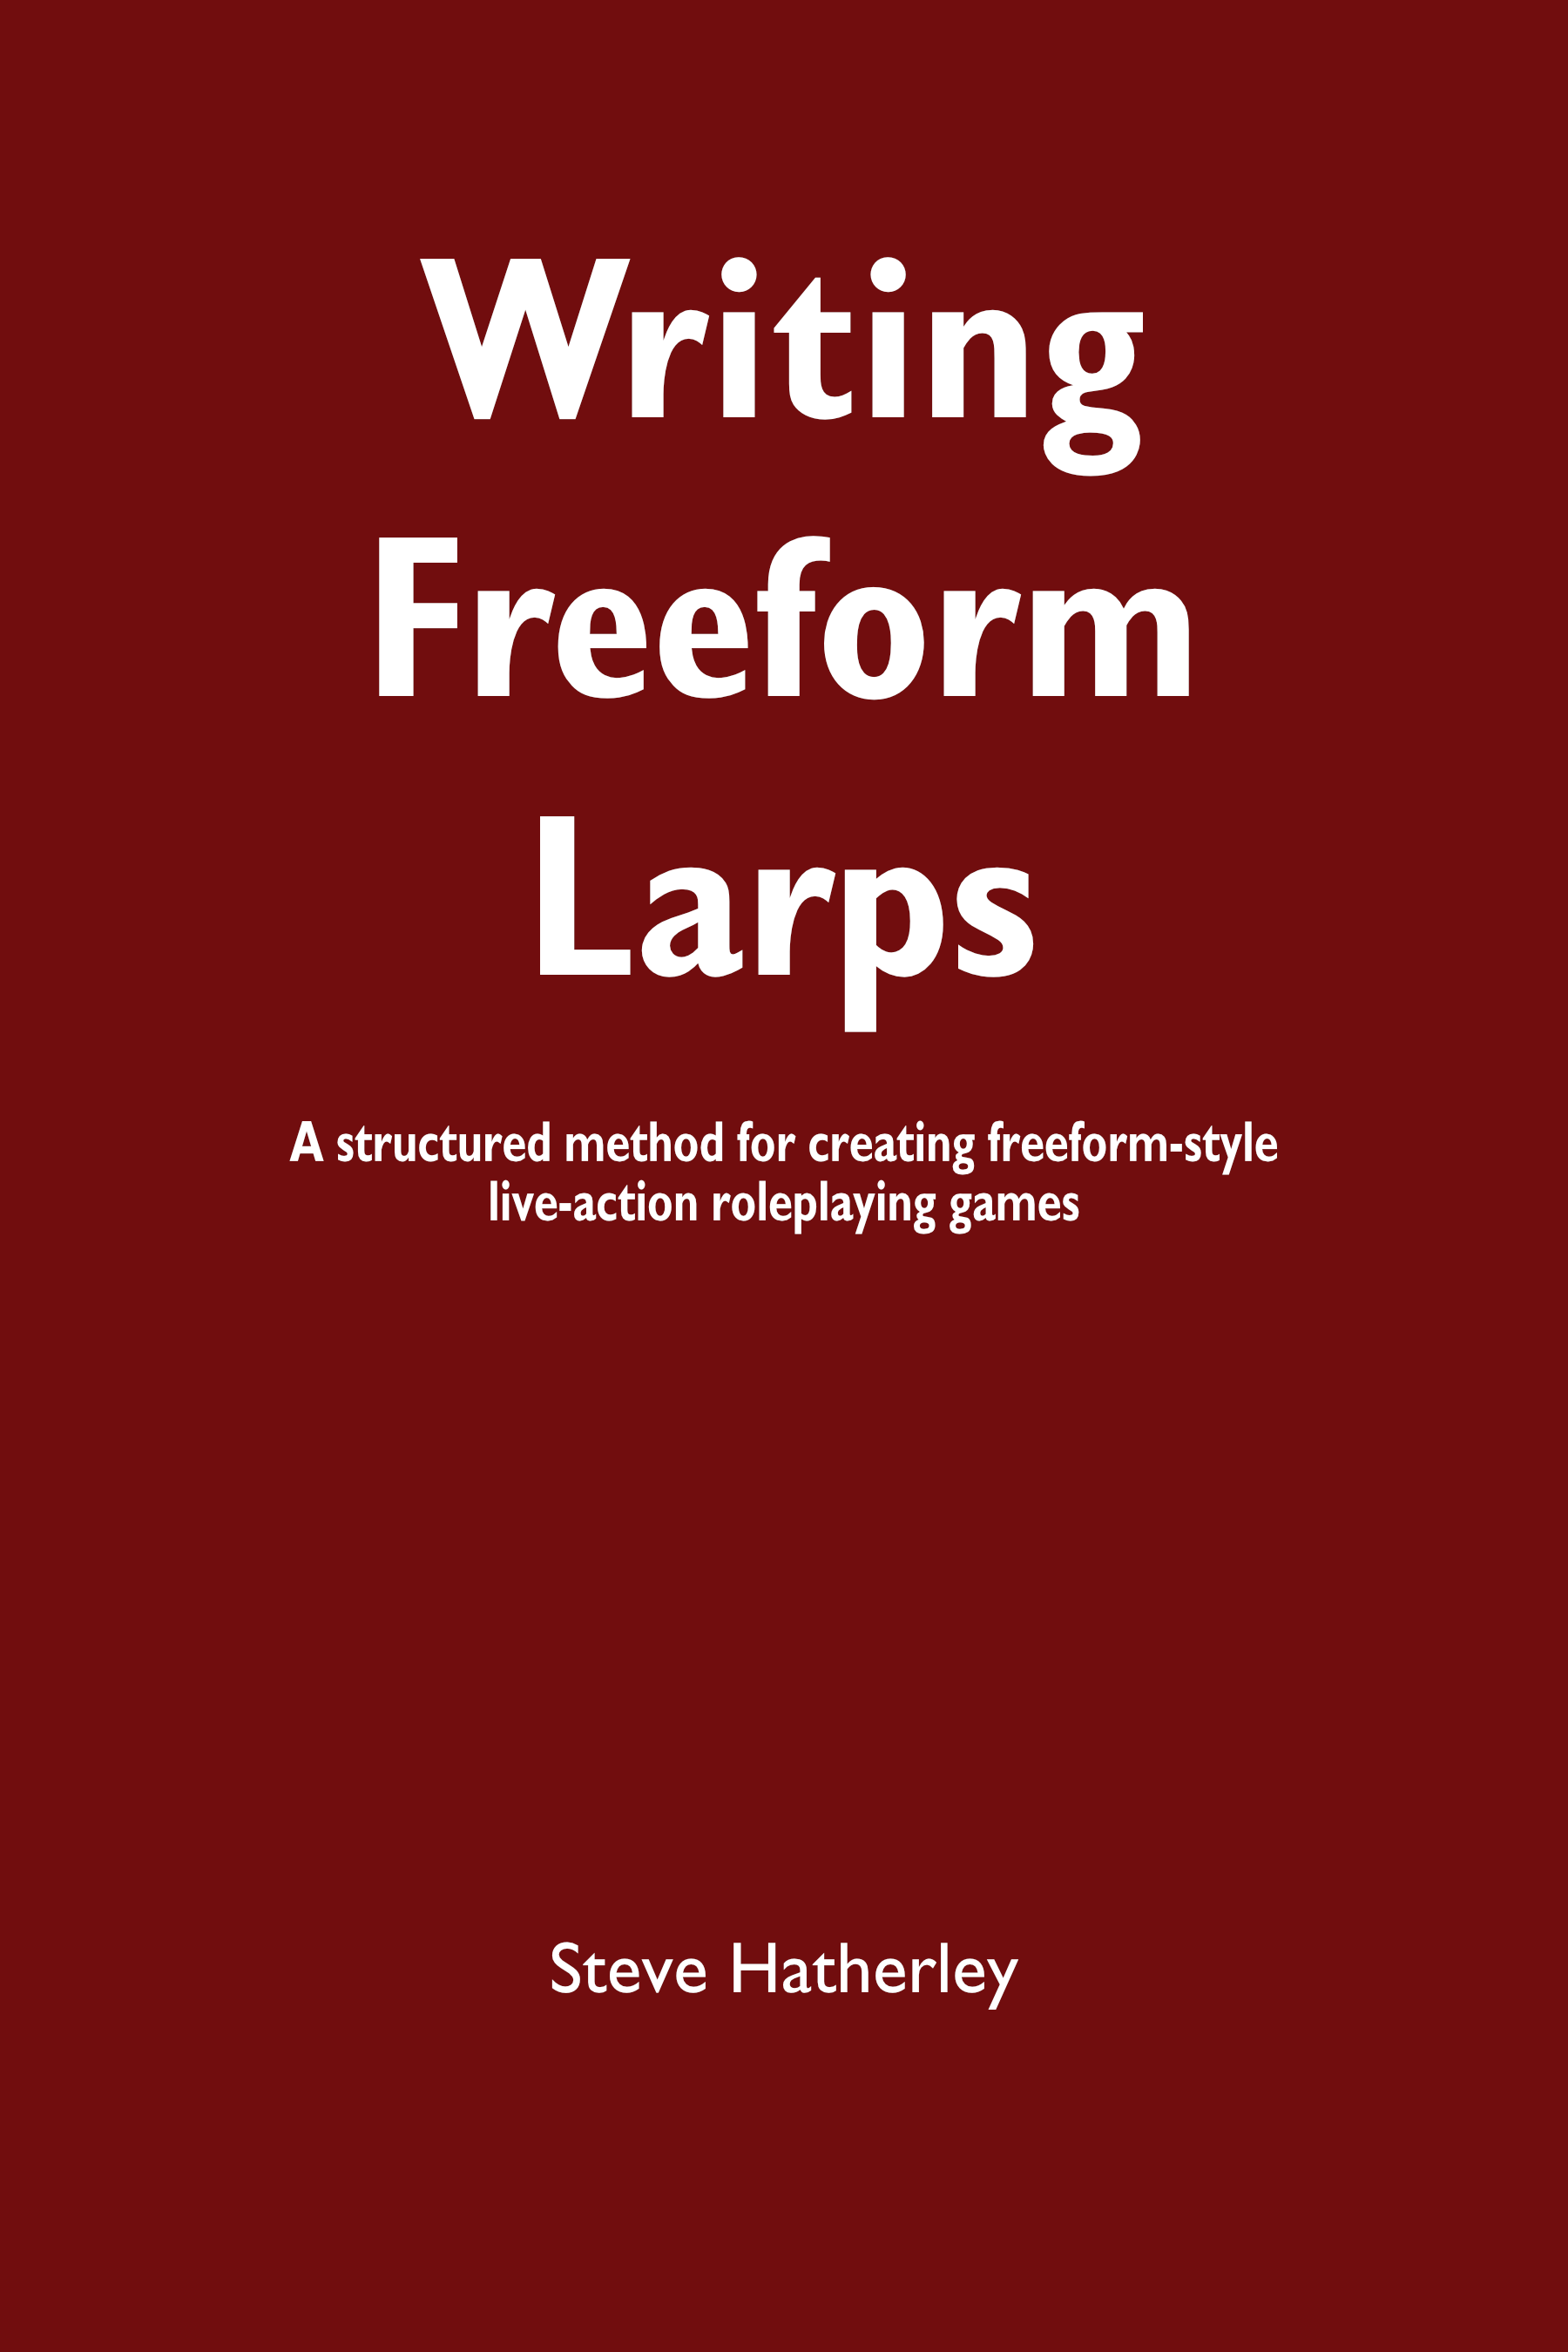 Writing Freeform Larps - the cover